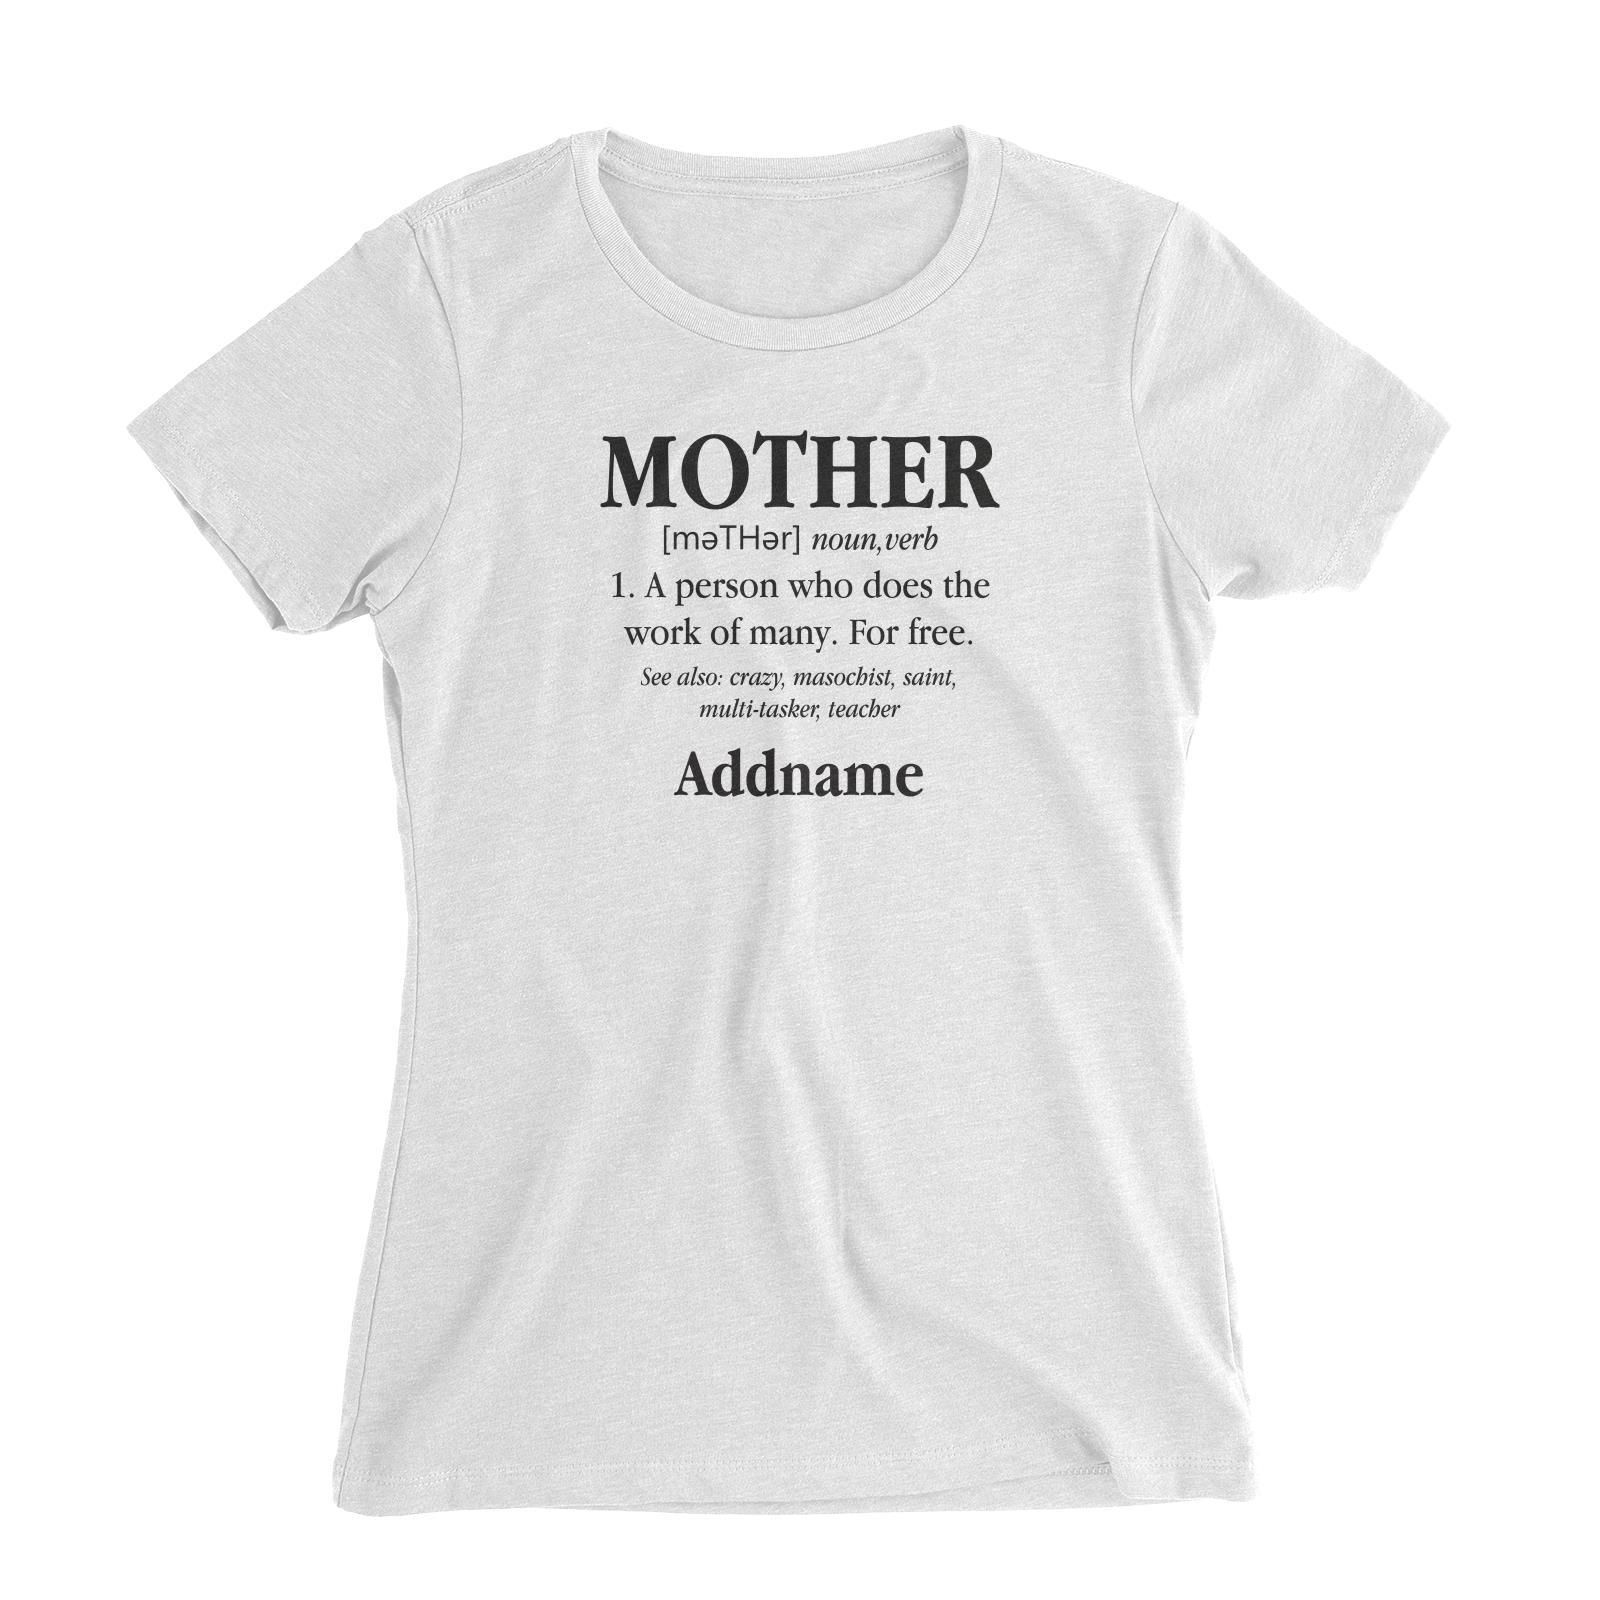 Funny Mom Quotes Mother Meaning A Person Who Does The Work Of Many For Free Addname Women's Slim Fit T-Shirt